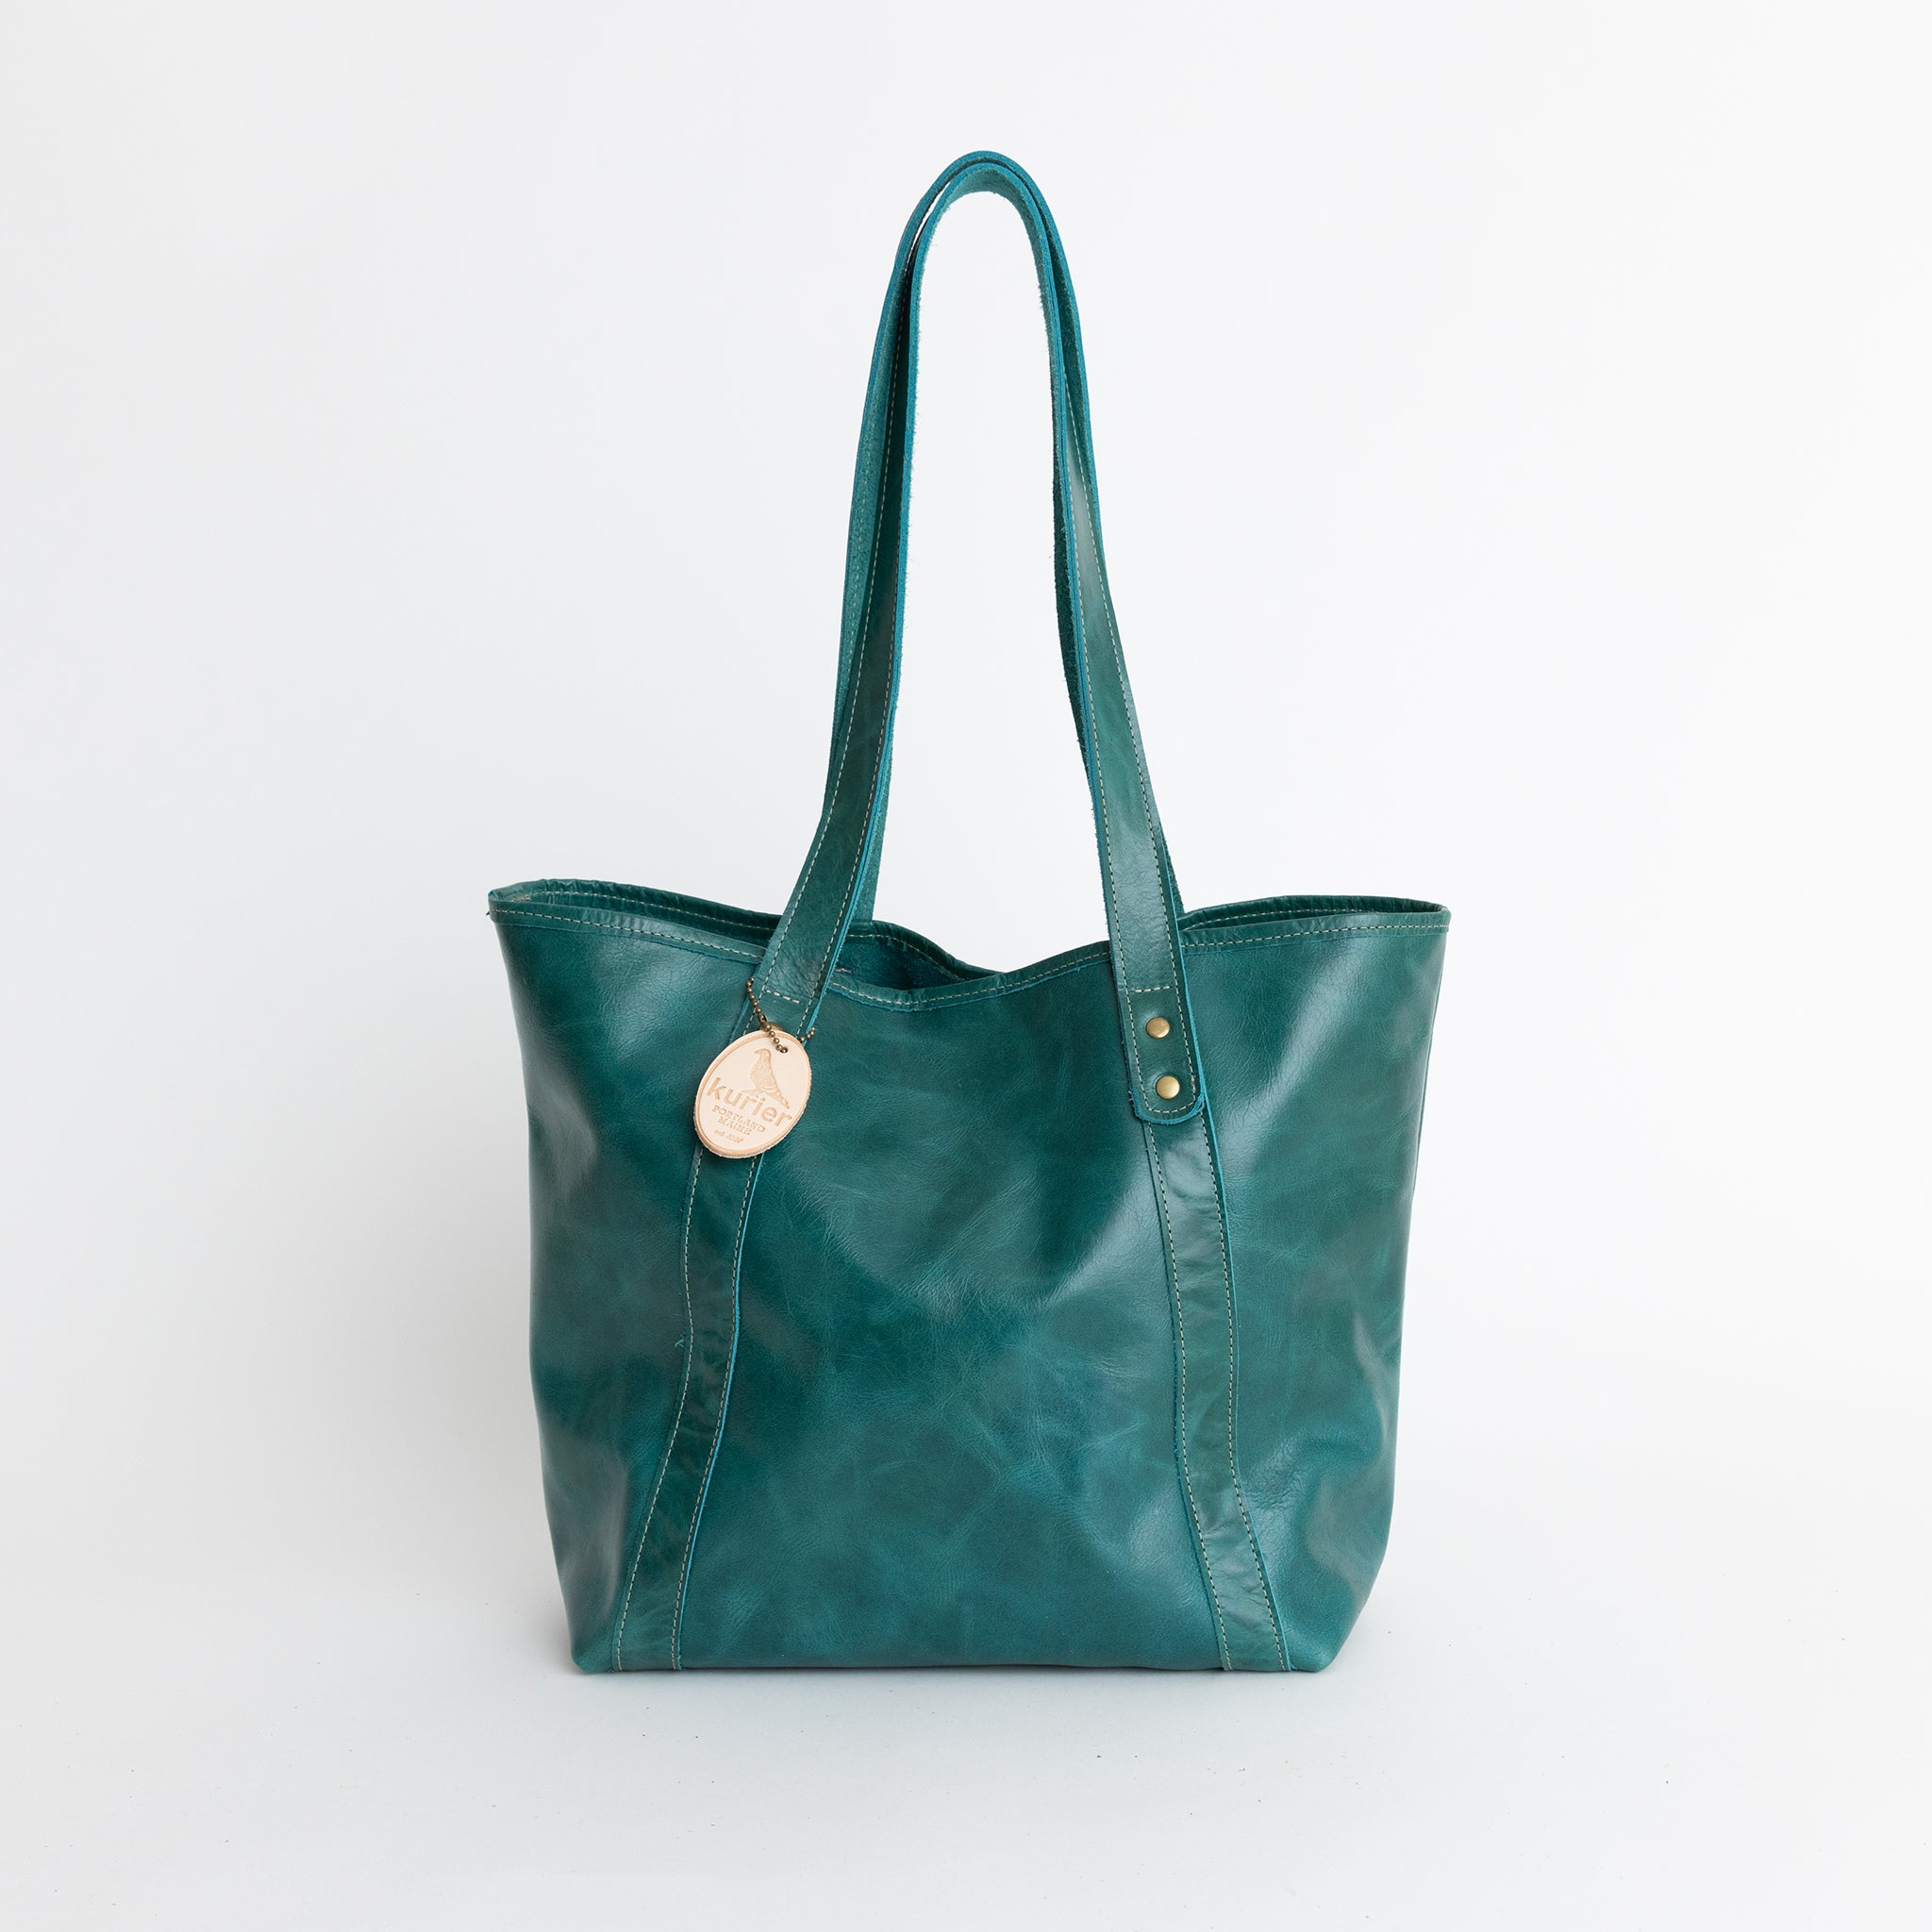 blue hill tote - travel bag non slip - handmade leather - ocean front view